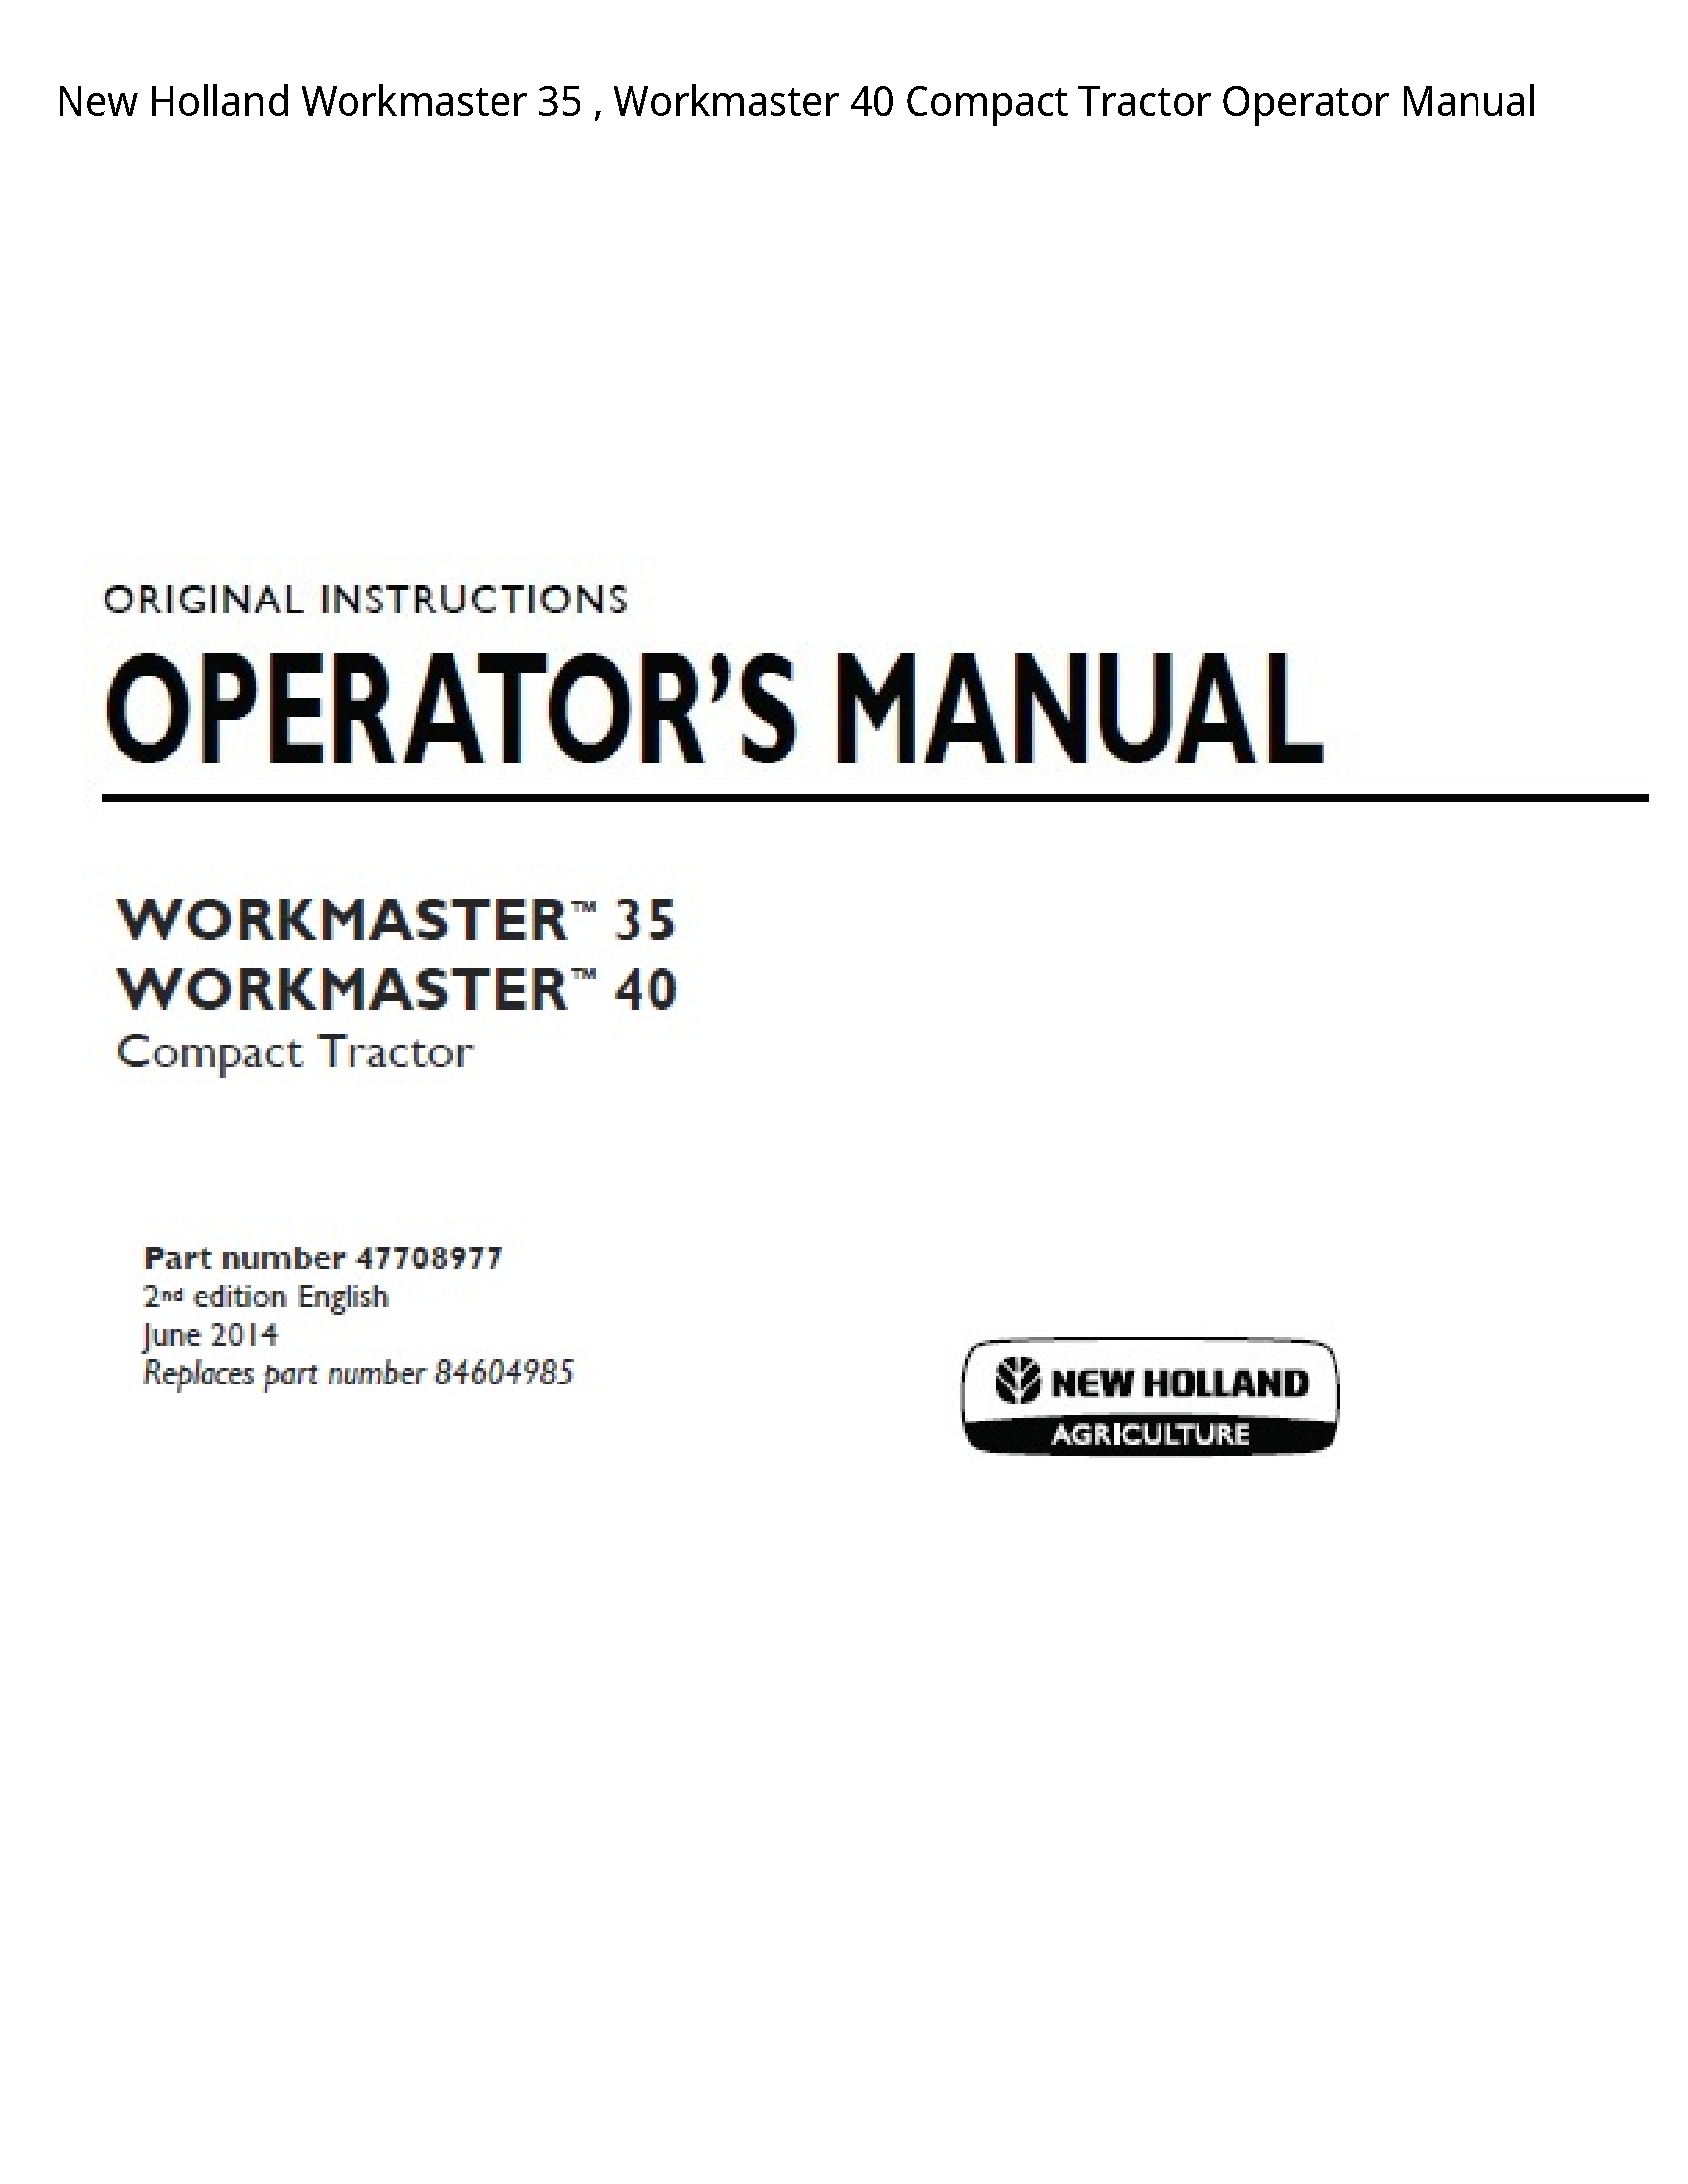 New Holland 35 Workmaster Workmaster Compact Tractor Operator manual